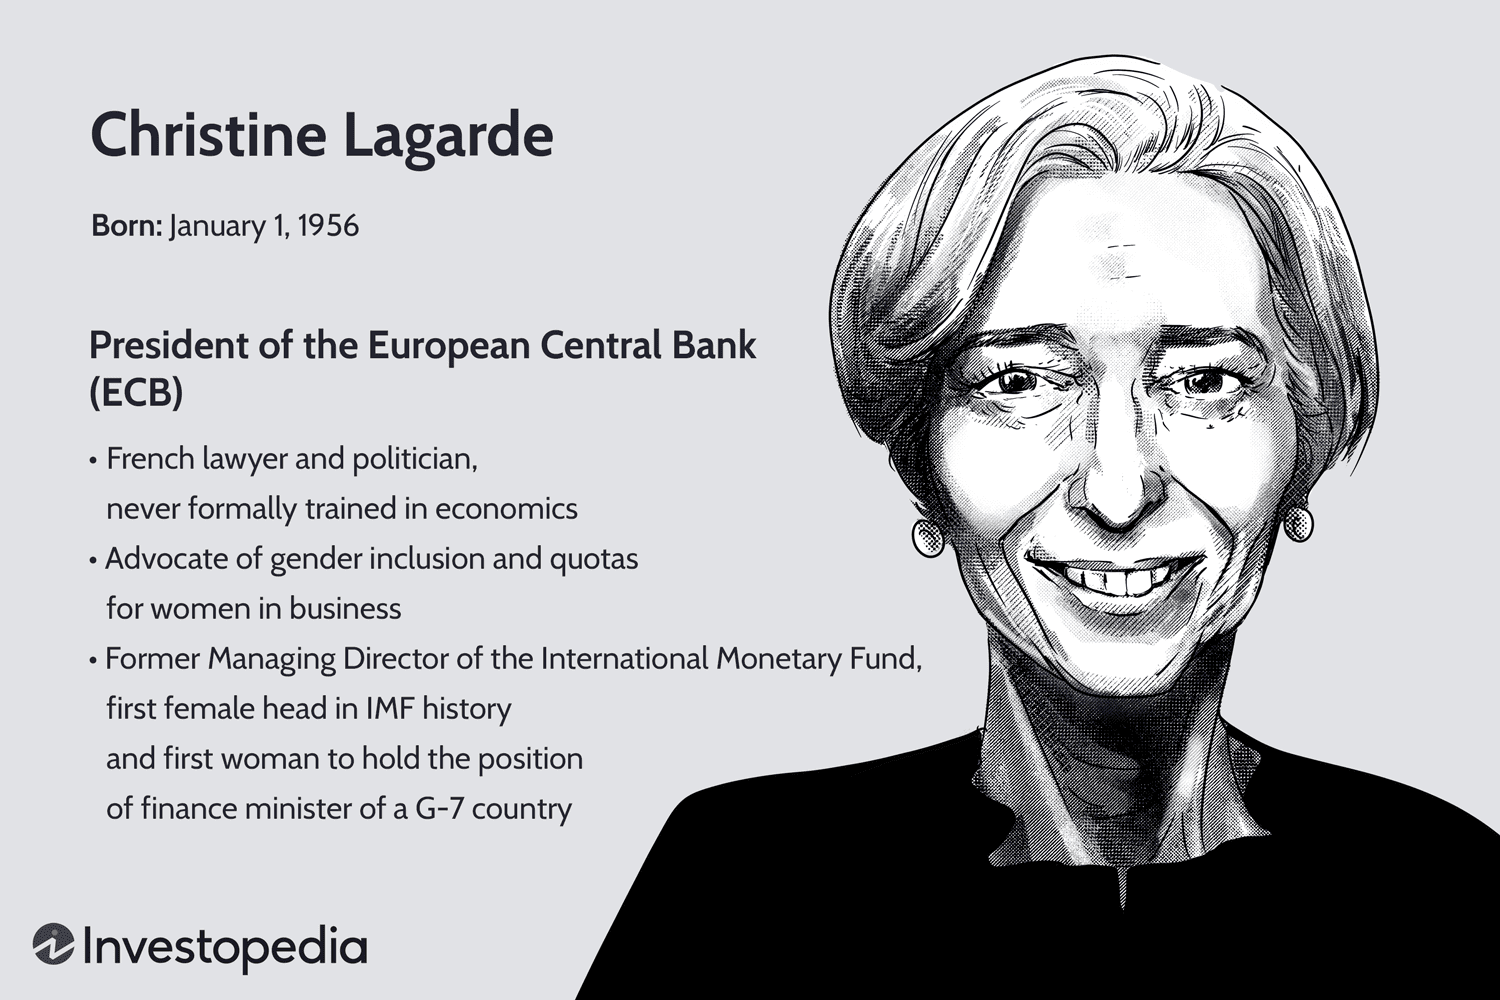 Who Is Christine Lagarde, and What Is Her Role at the European Central Bank? [Video]